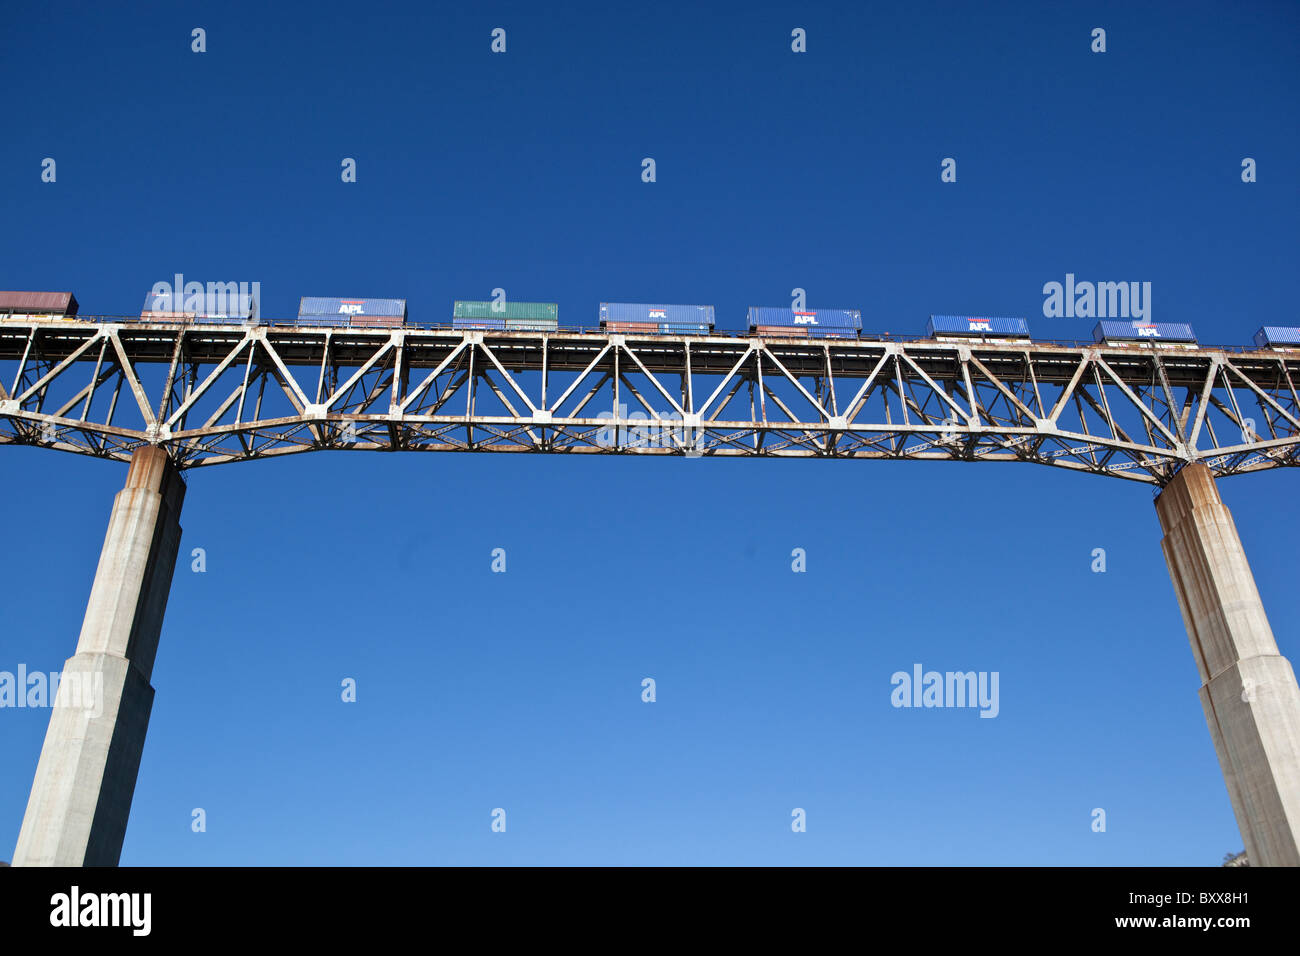 Pecos High Bridge, a steel deck truss style, carries the Southern Pacific Railroad across Pecos River gorge in southwest Texas. Stock Photo